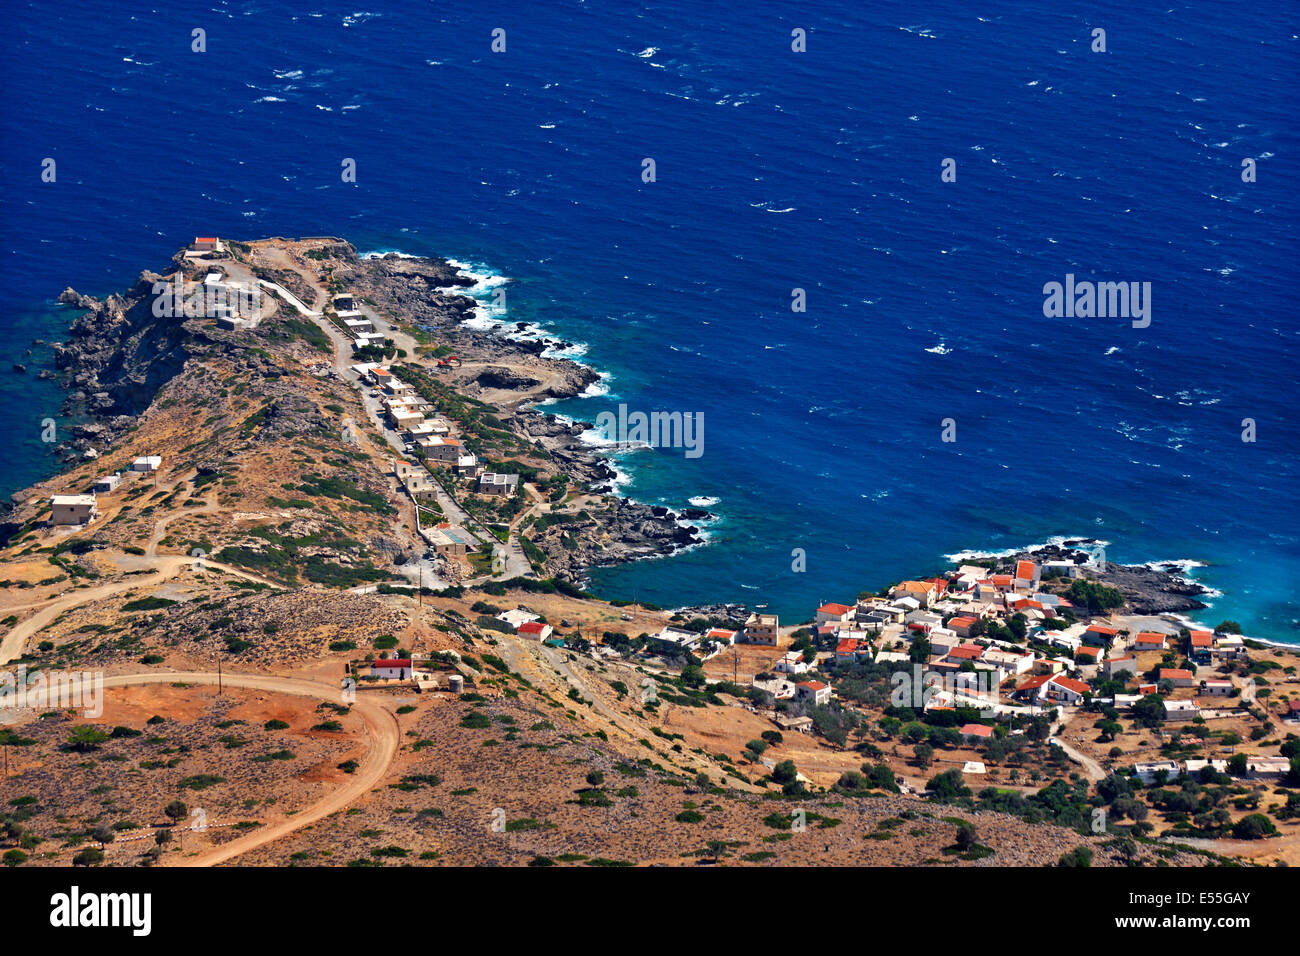 Heraklion Greece High Resolution Stock Photography and Images - Alamy